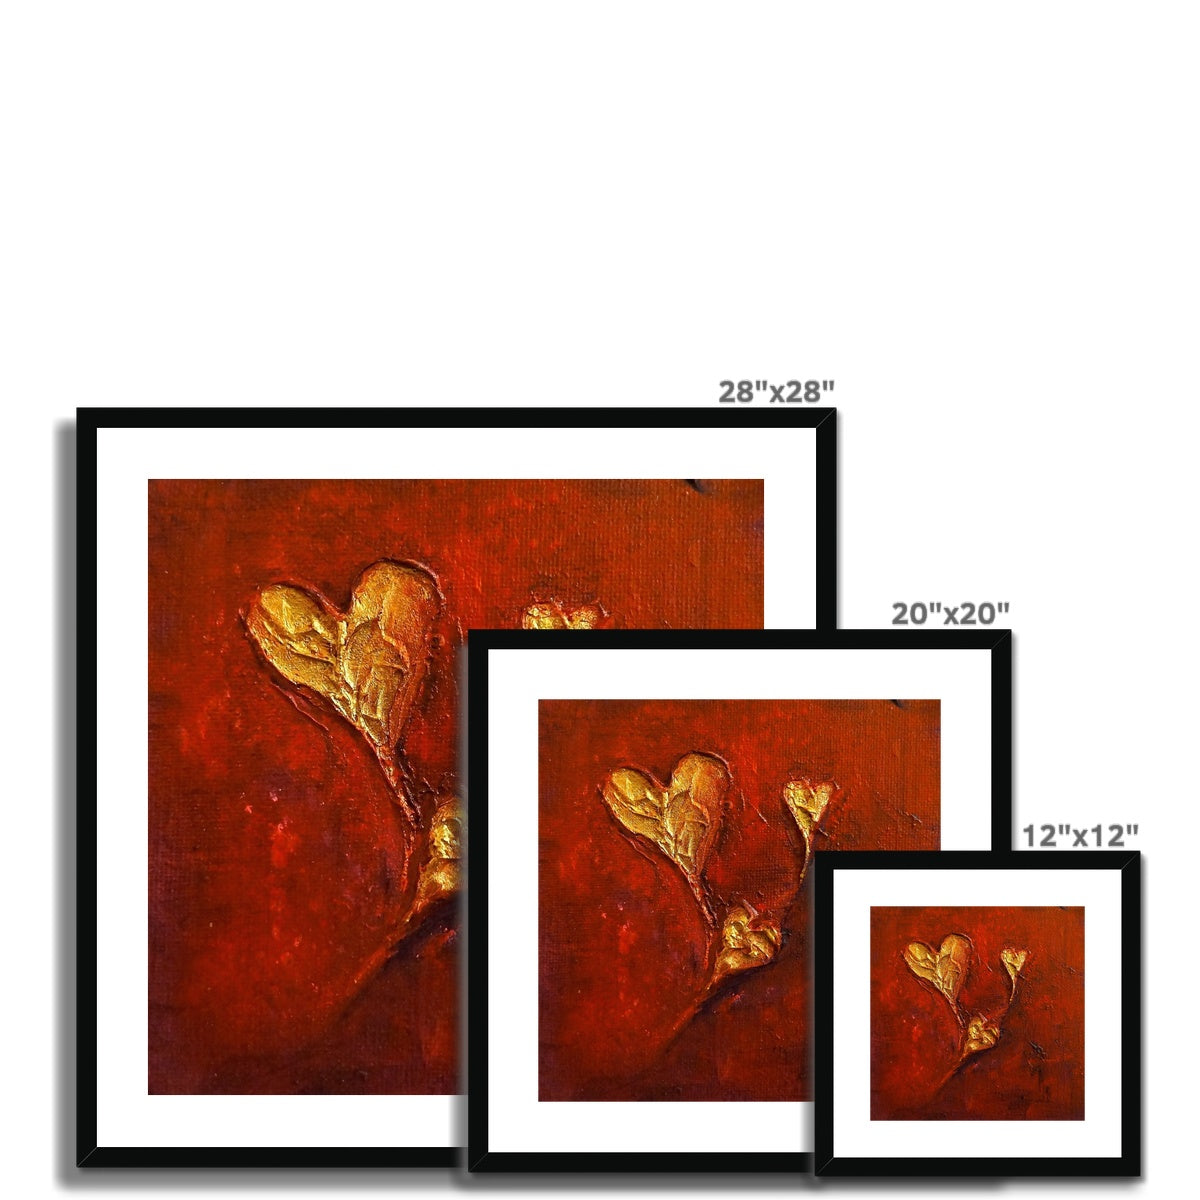 Hearts Abstract Painting | Framed & Mounted Prints From Scotland-Framed & Mounted Prints-Abstract & Impressionistic Art Gallery-Paintings, Prints, Homeware, Art Gifts From Scotland By Scottish Artist Kevin Hunter